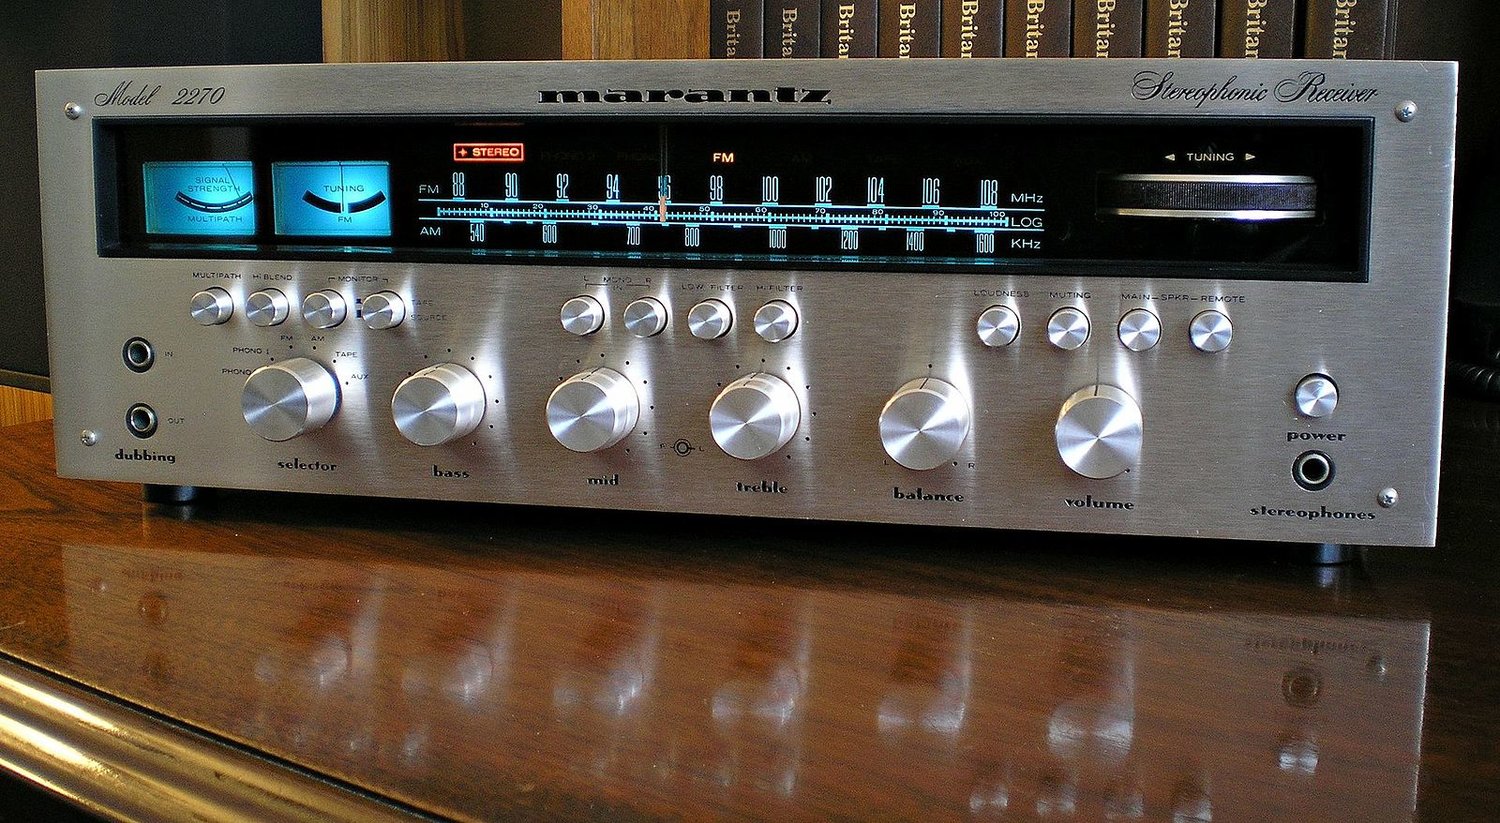 Vintage Marantz receiver, with machined aluminum and lots of knobs to fiddle with. Photo by Ron Clausen.